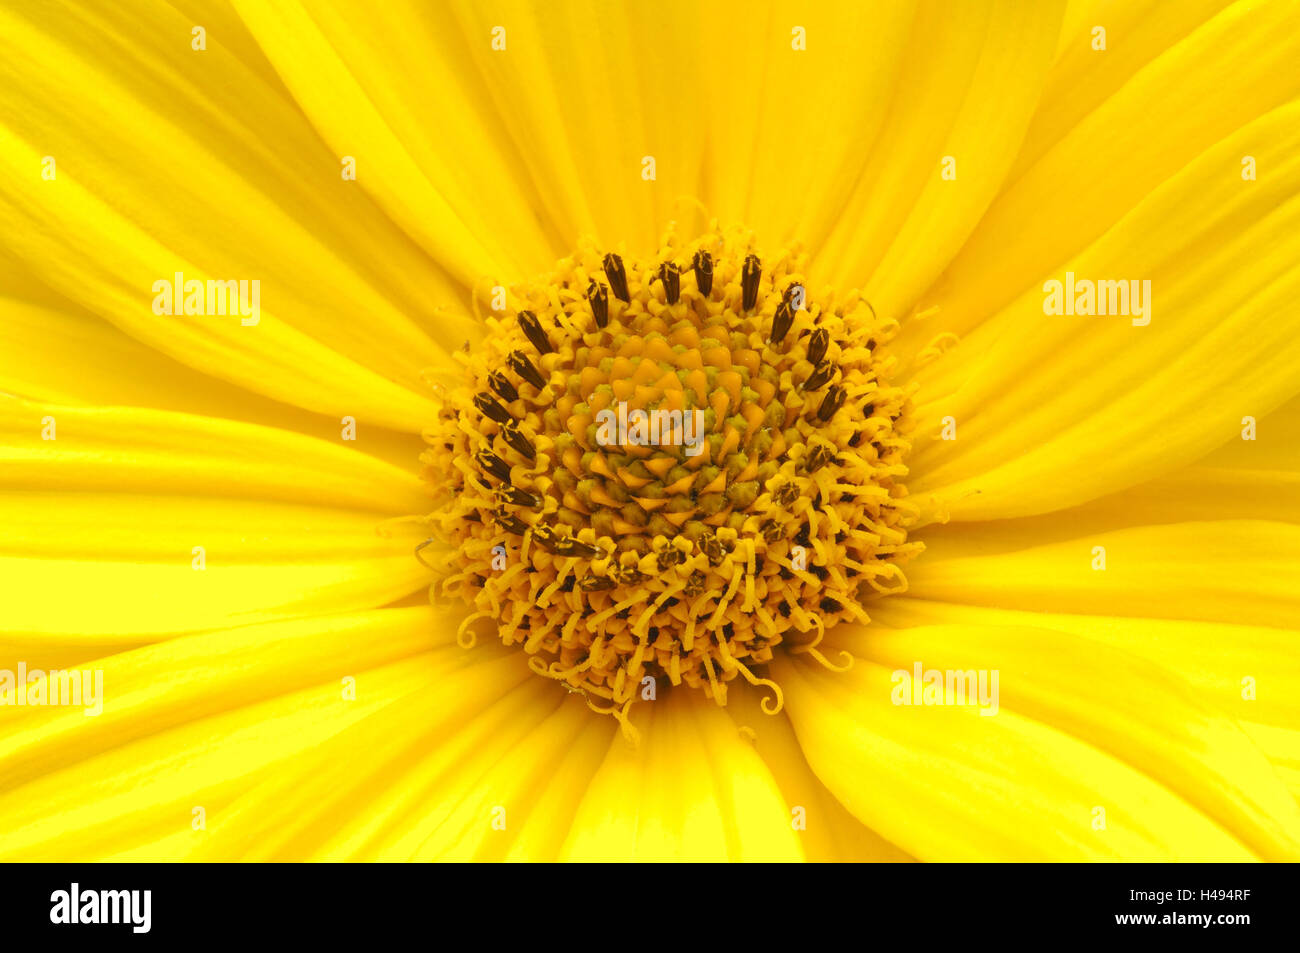 Heliopsis, Heliopsis helianthoides var. scabra, blossom, close up, Stock Photo